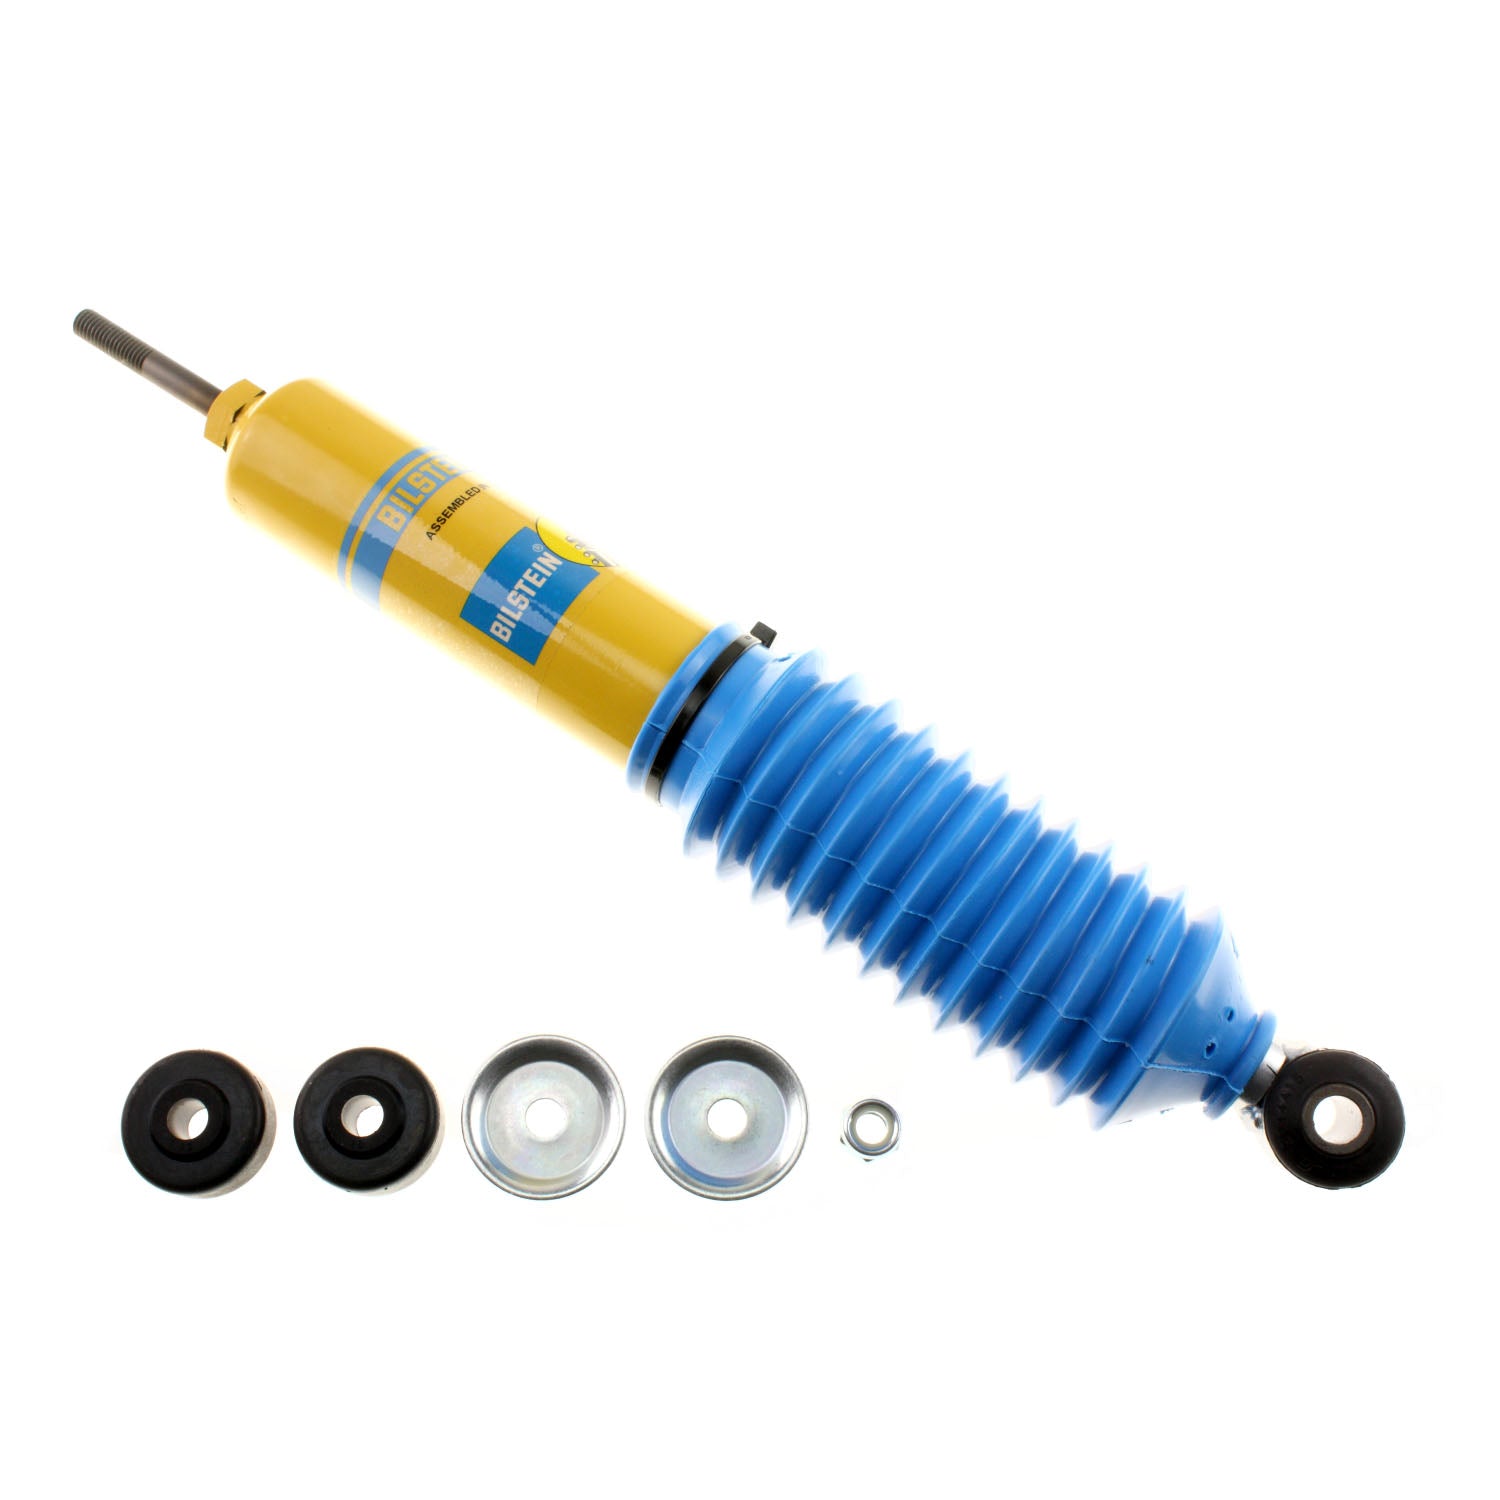 Bilstein 4600  Ford Light Truck For Ford Bronco, Ford F-150, Ford F-250 Hd, Ford F-350